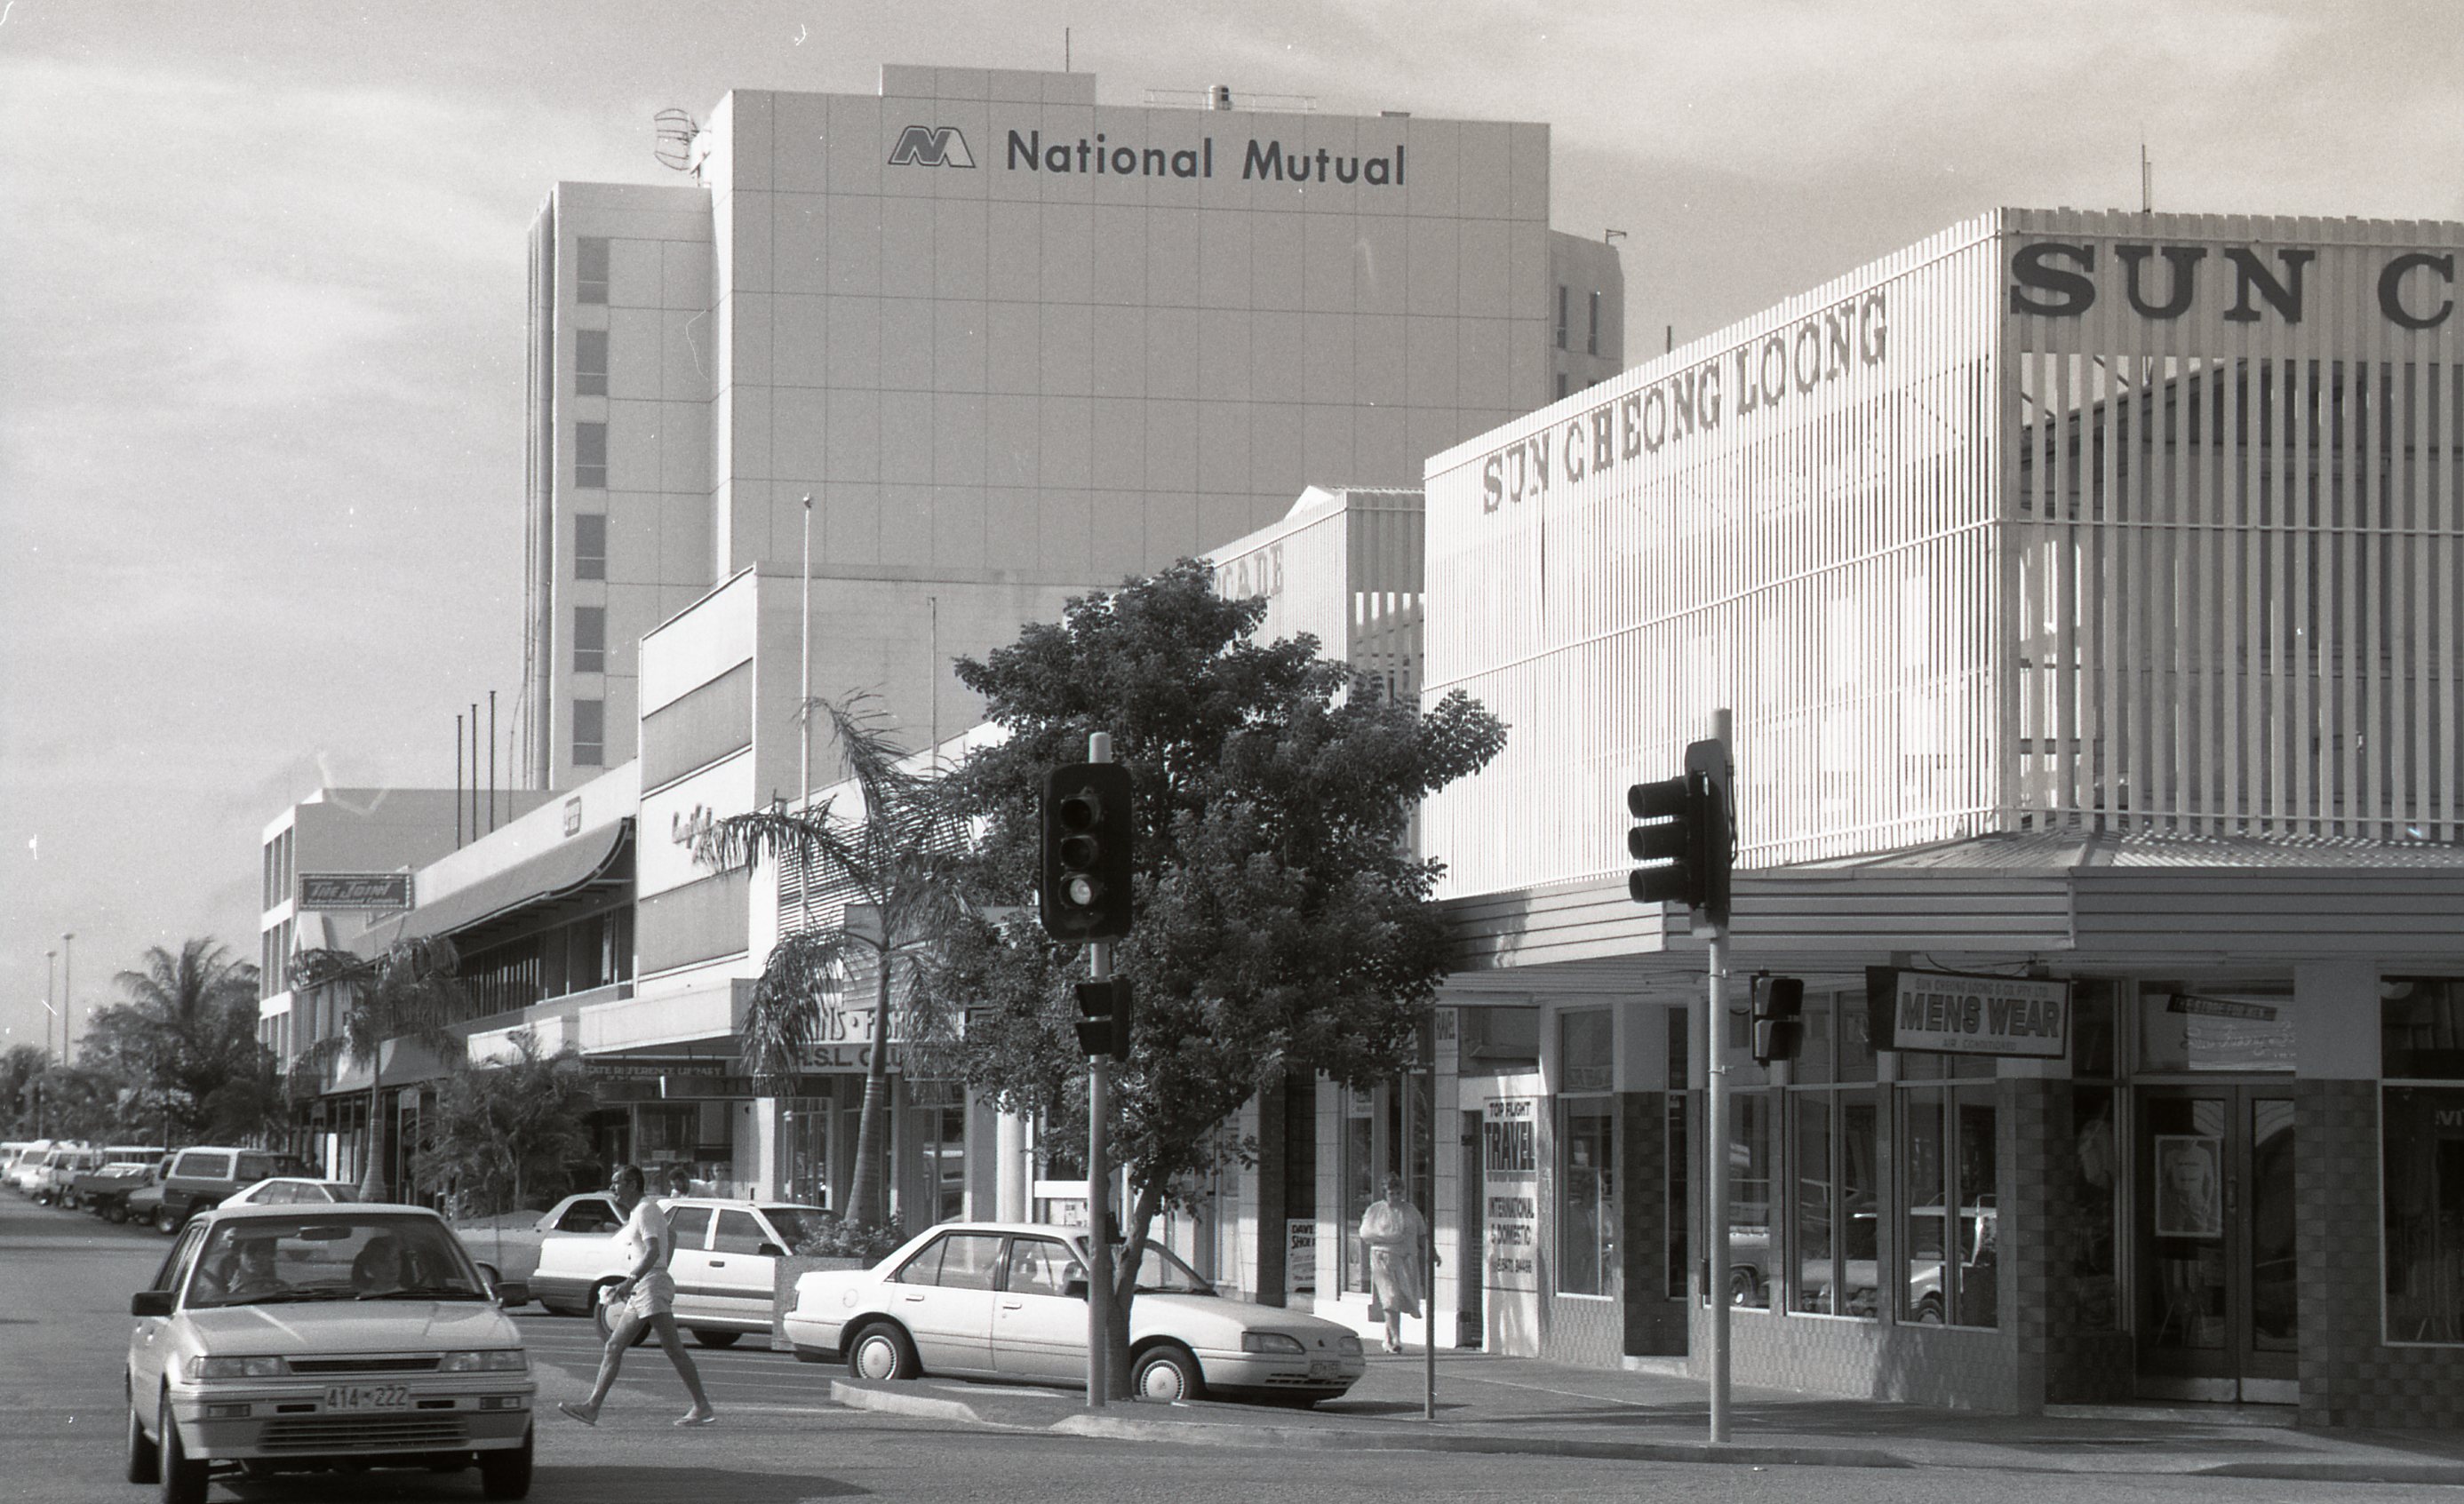 Corner of Cavenagh and Knuckey Streets, 19 April 1989<br />Image courtesy of Library & Archives NT,  Department of the Chief Minister, NTRS 3823 P1, Box 11, BW2811, Image 10